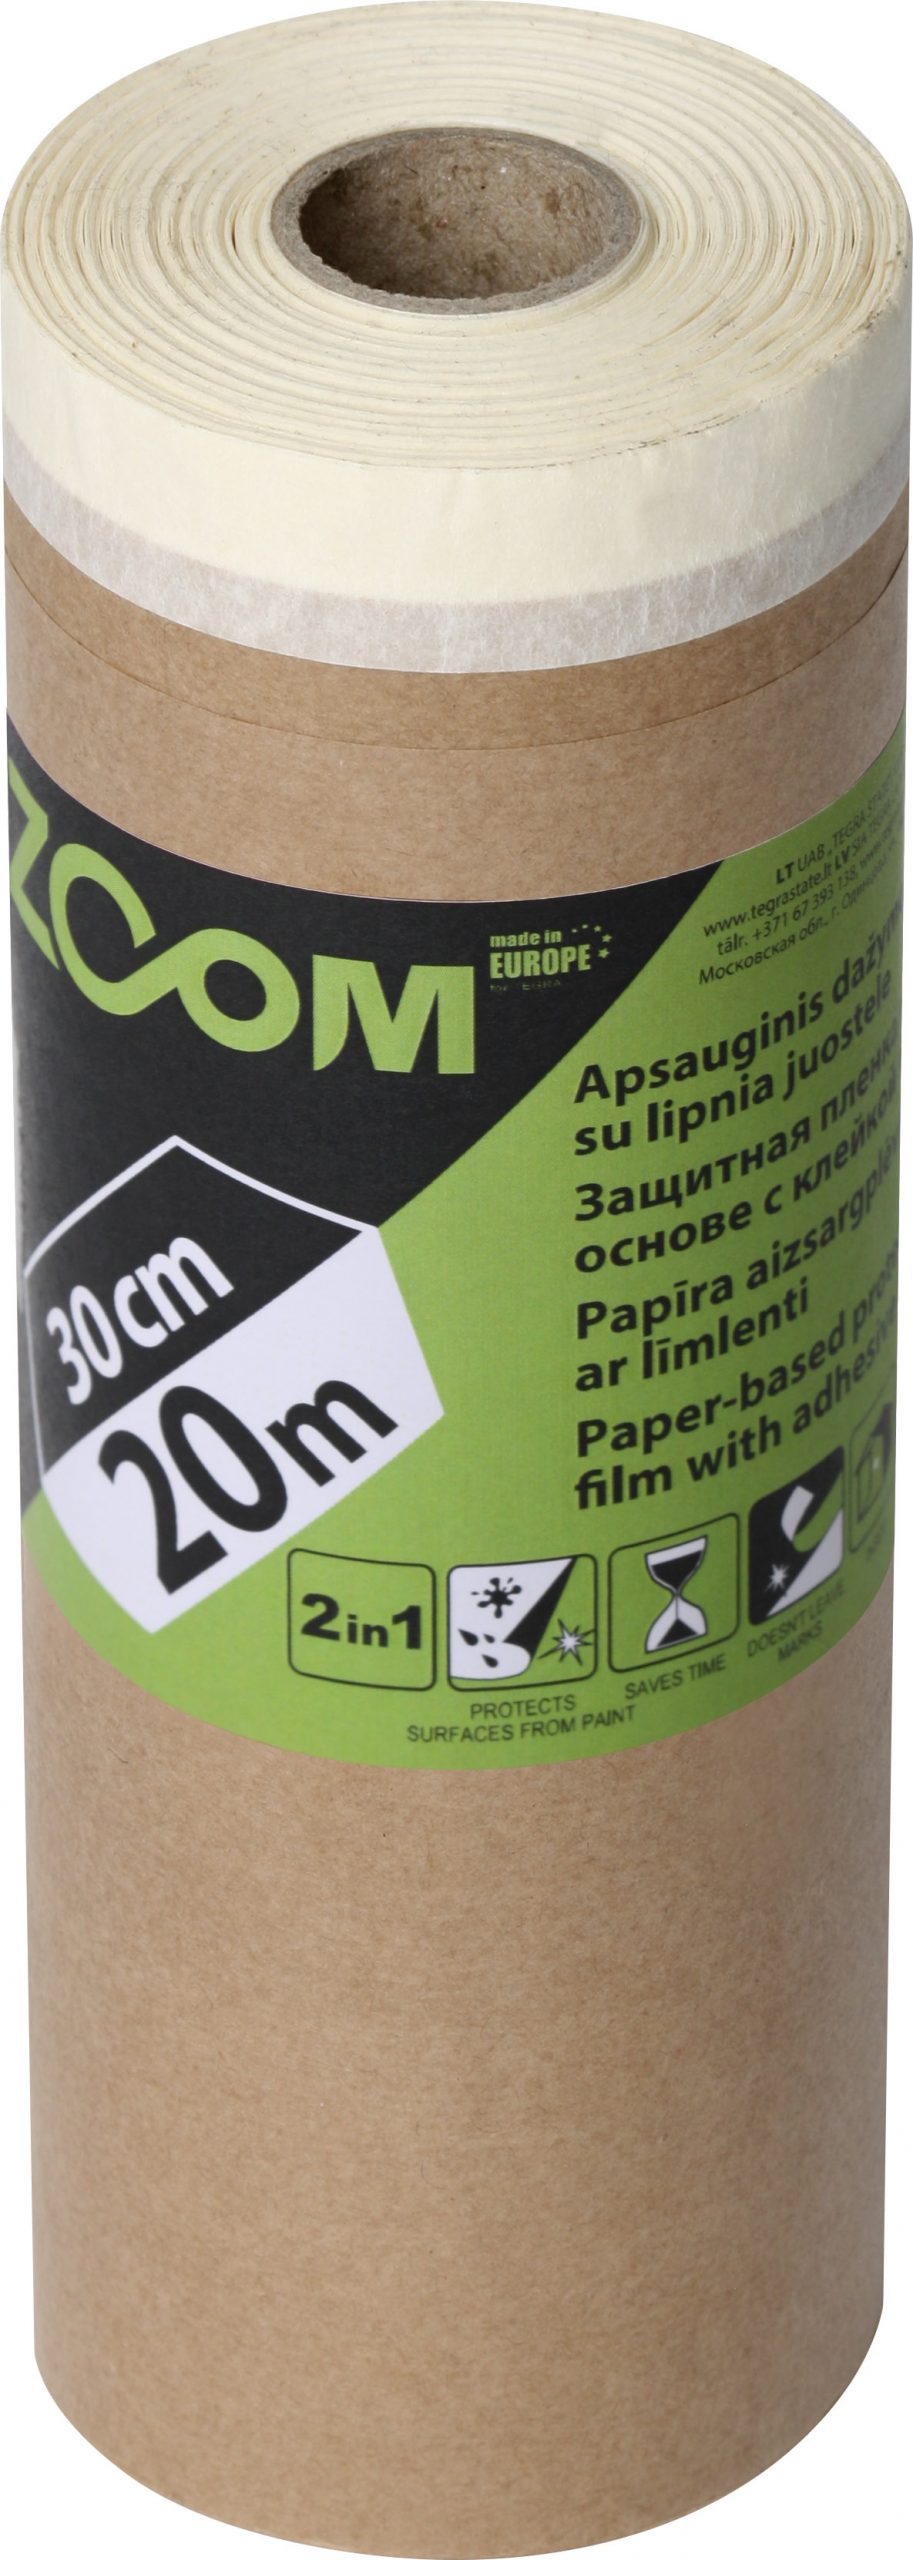 ZOOM Adhesive tape with protective paper for painting